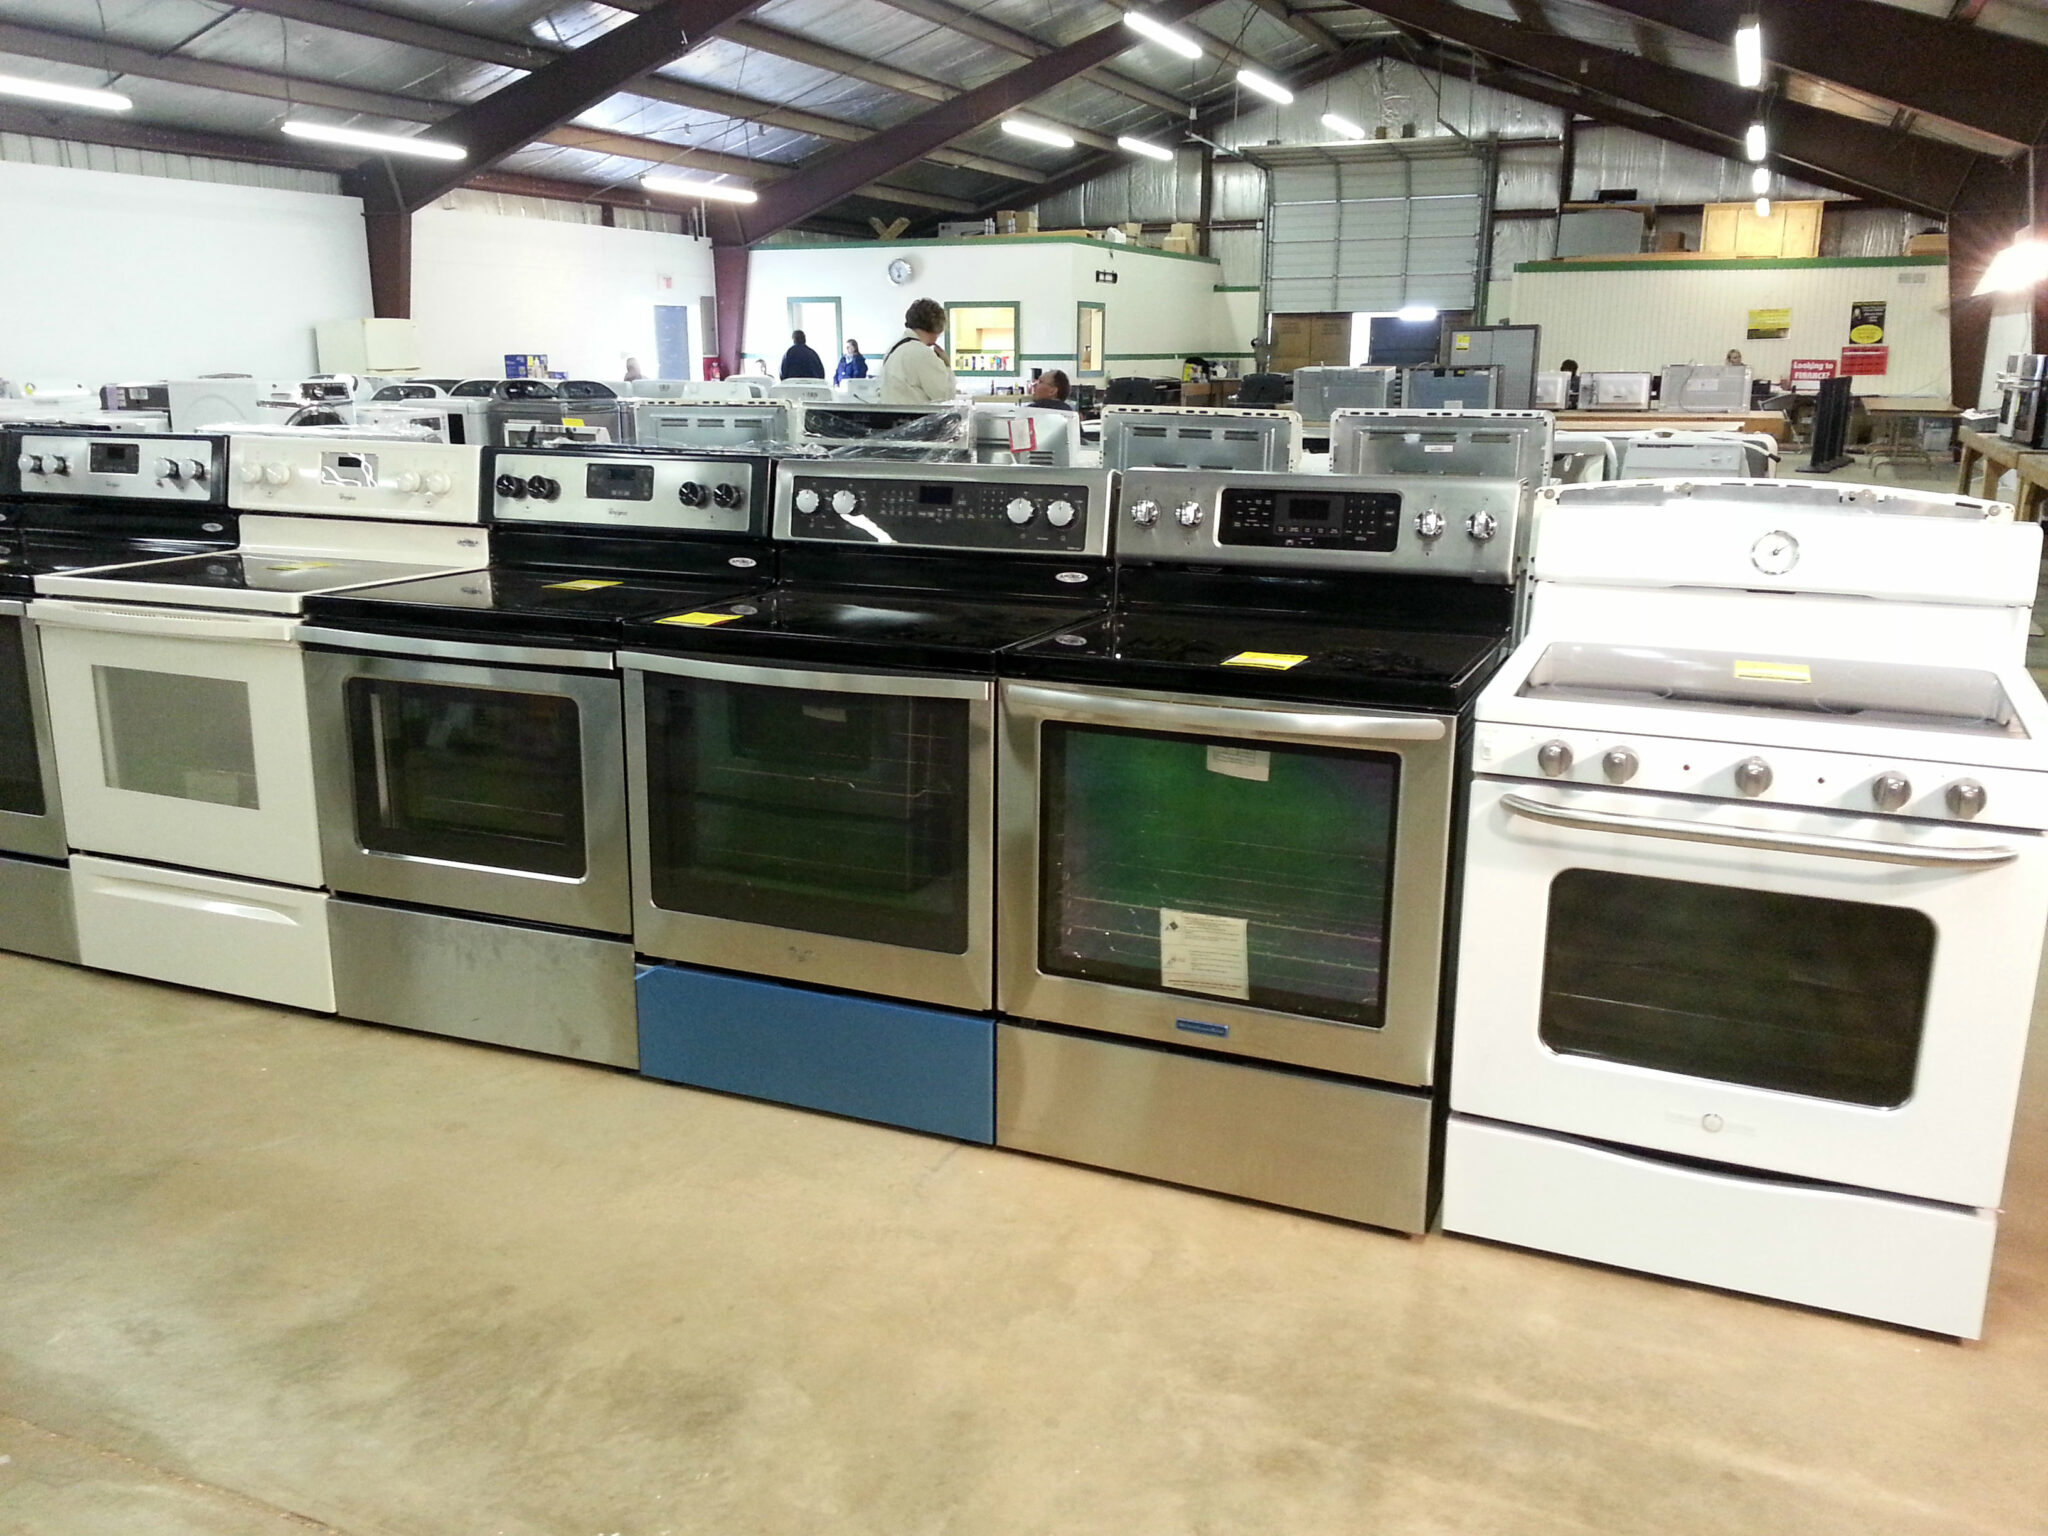 Ovens Stoves Cooktops at Silica Appliance Liquidation Sale